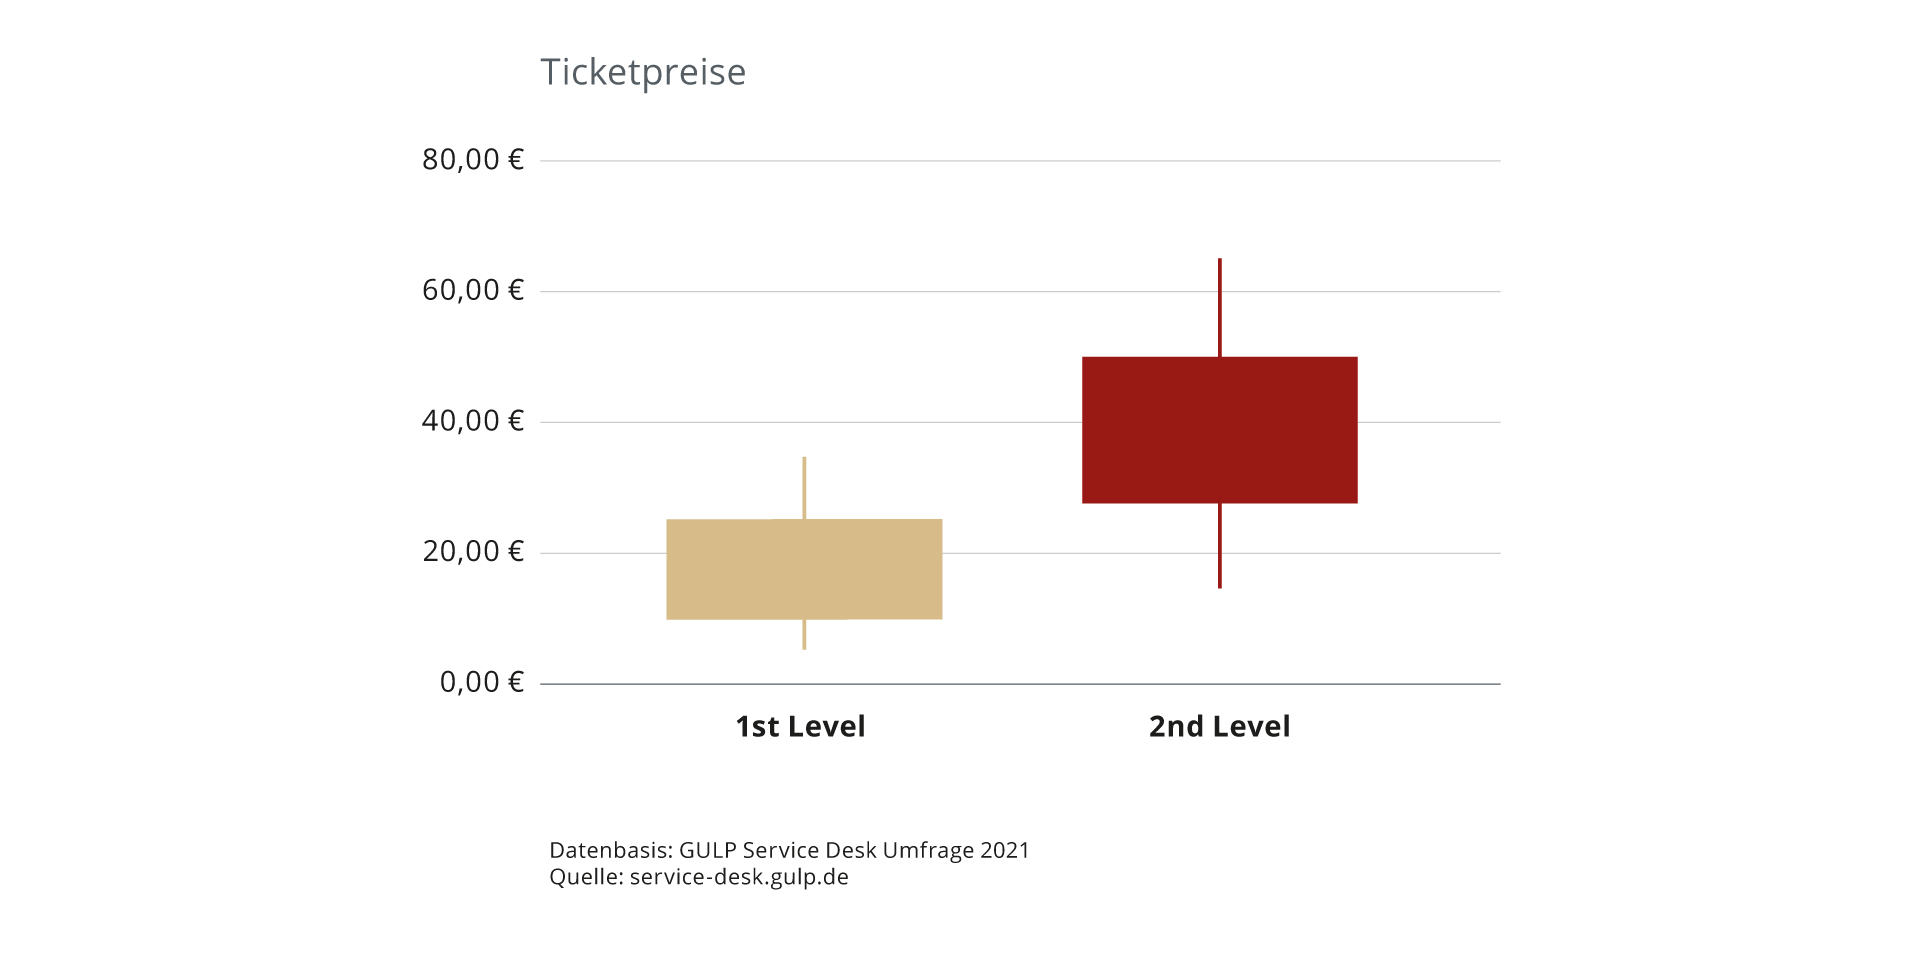 IT-Outsourcing Ticketpreise: Welche Rolle spielt Ticketpricing bei IT-Outsourcing?